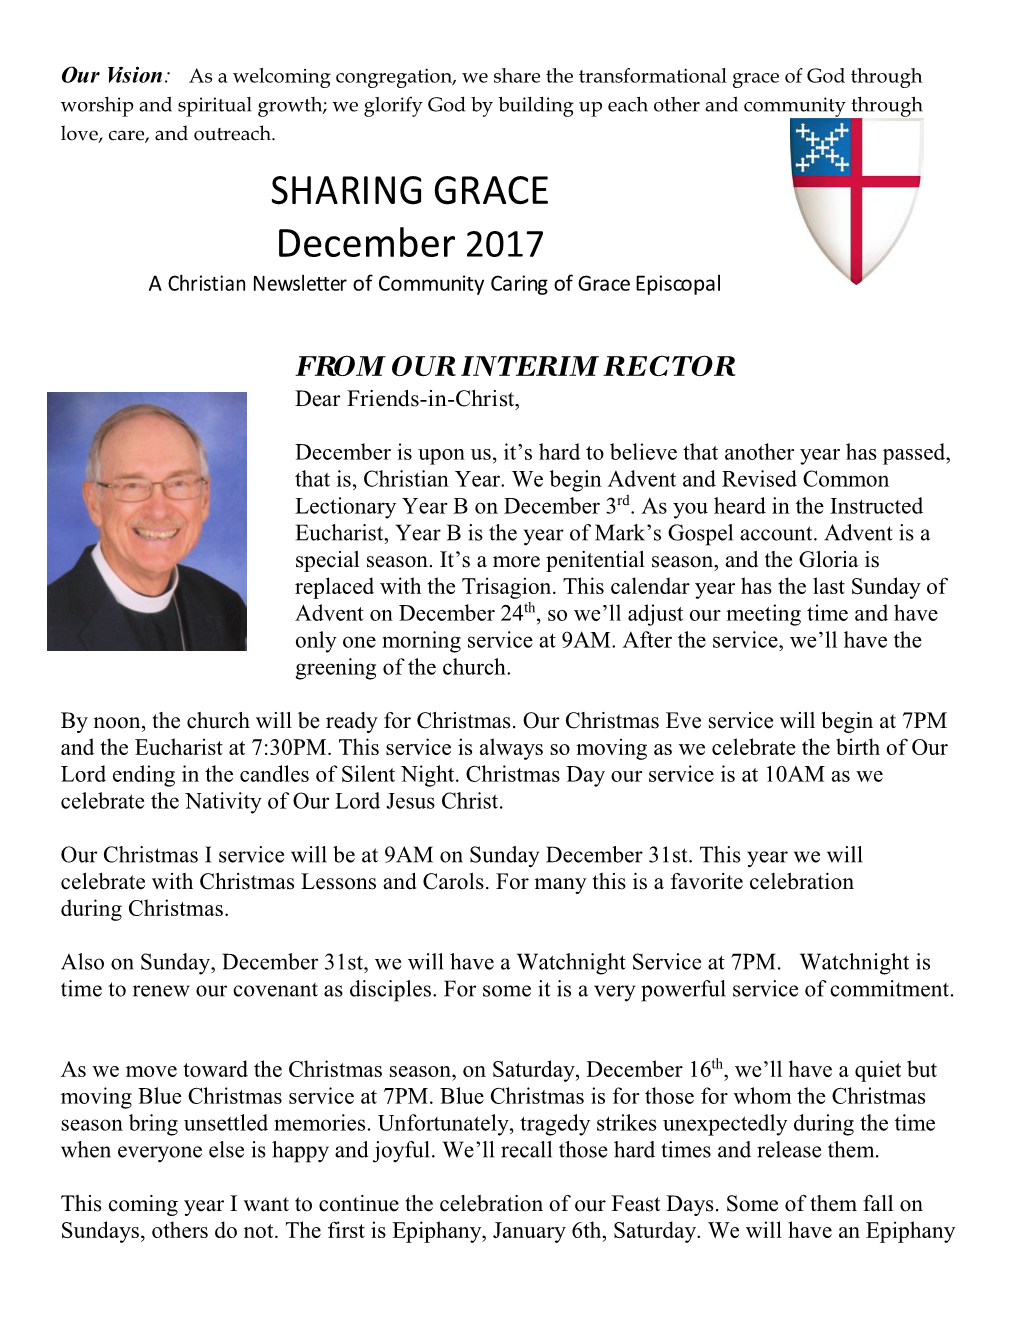 SHARING GRACE December 2017 a Christian Newsletter of Community Caring of Grace Episcopal